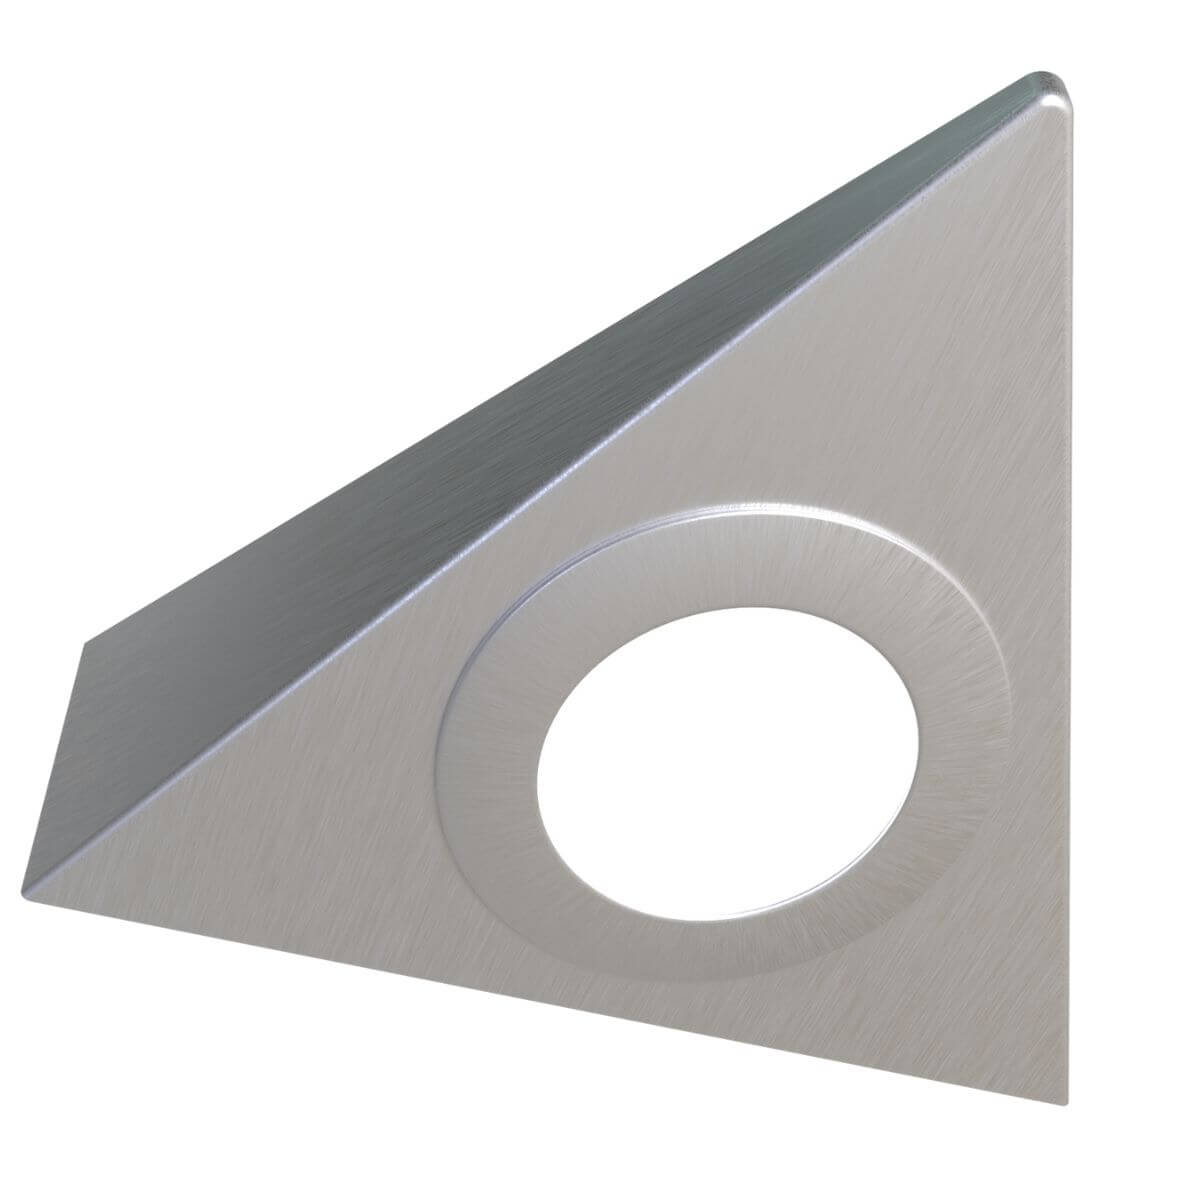 View Mains Powered Triangle Under Cabinet Light Brushed Chrome Finish information